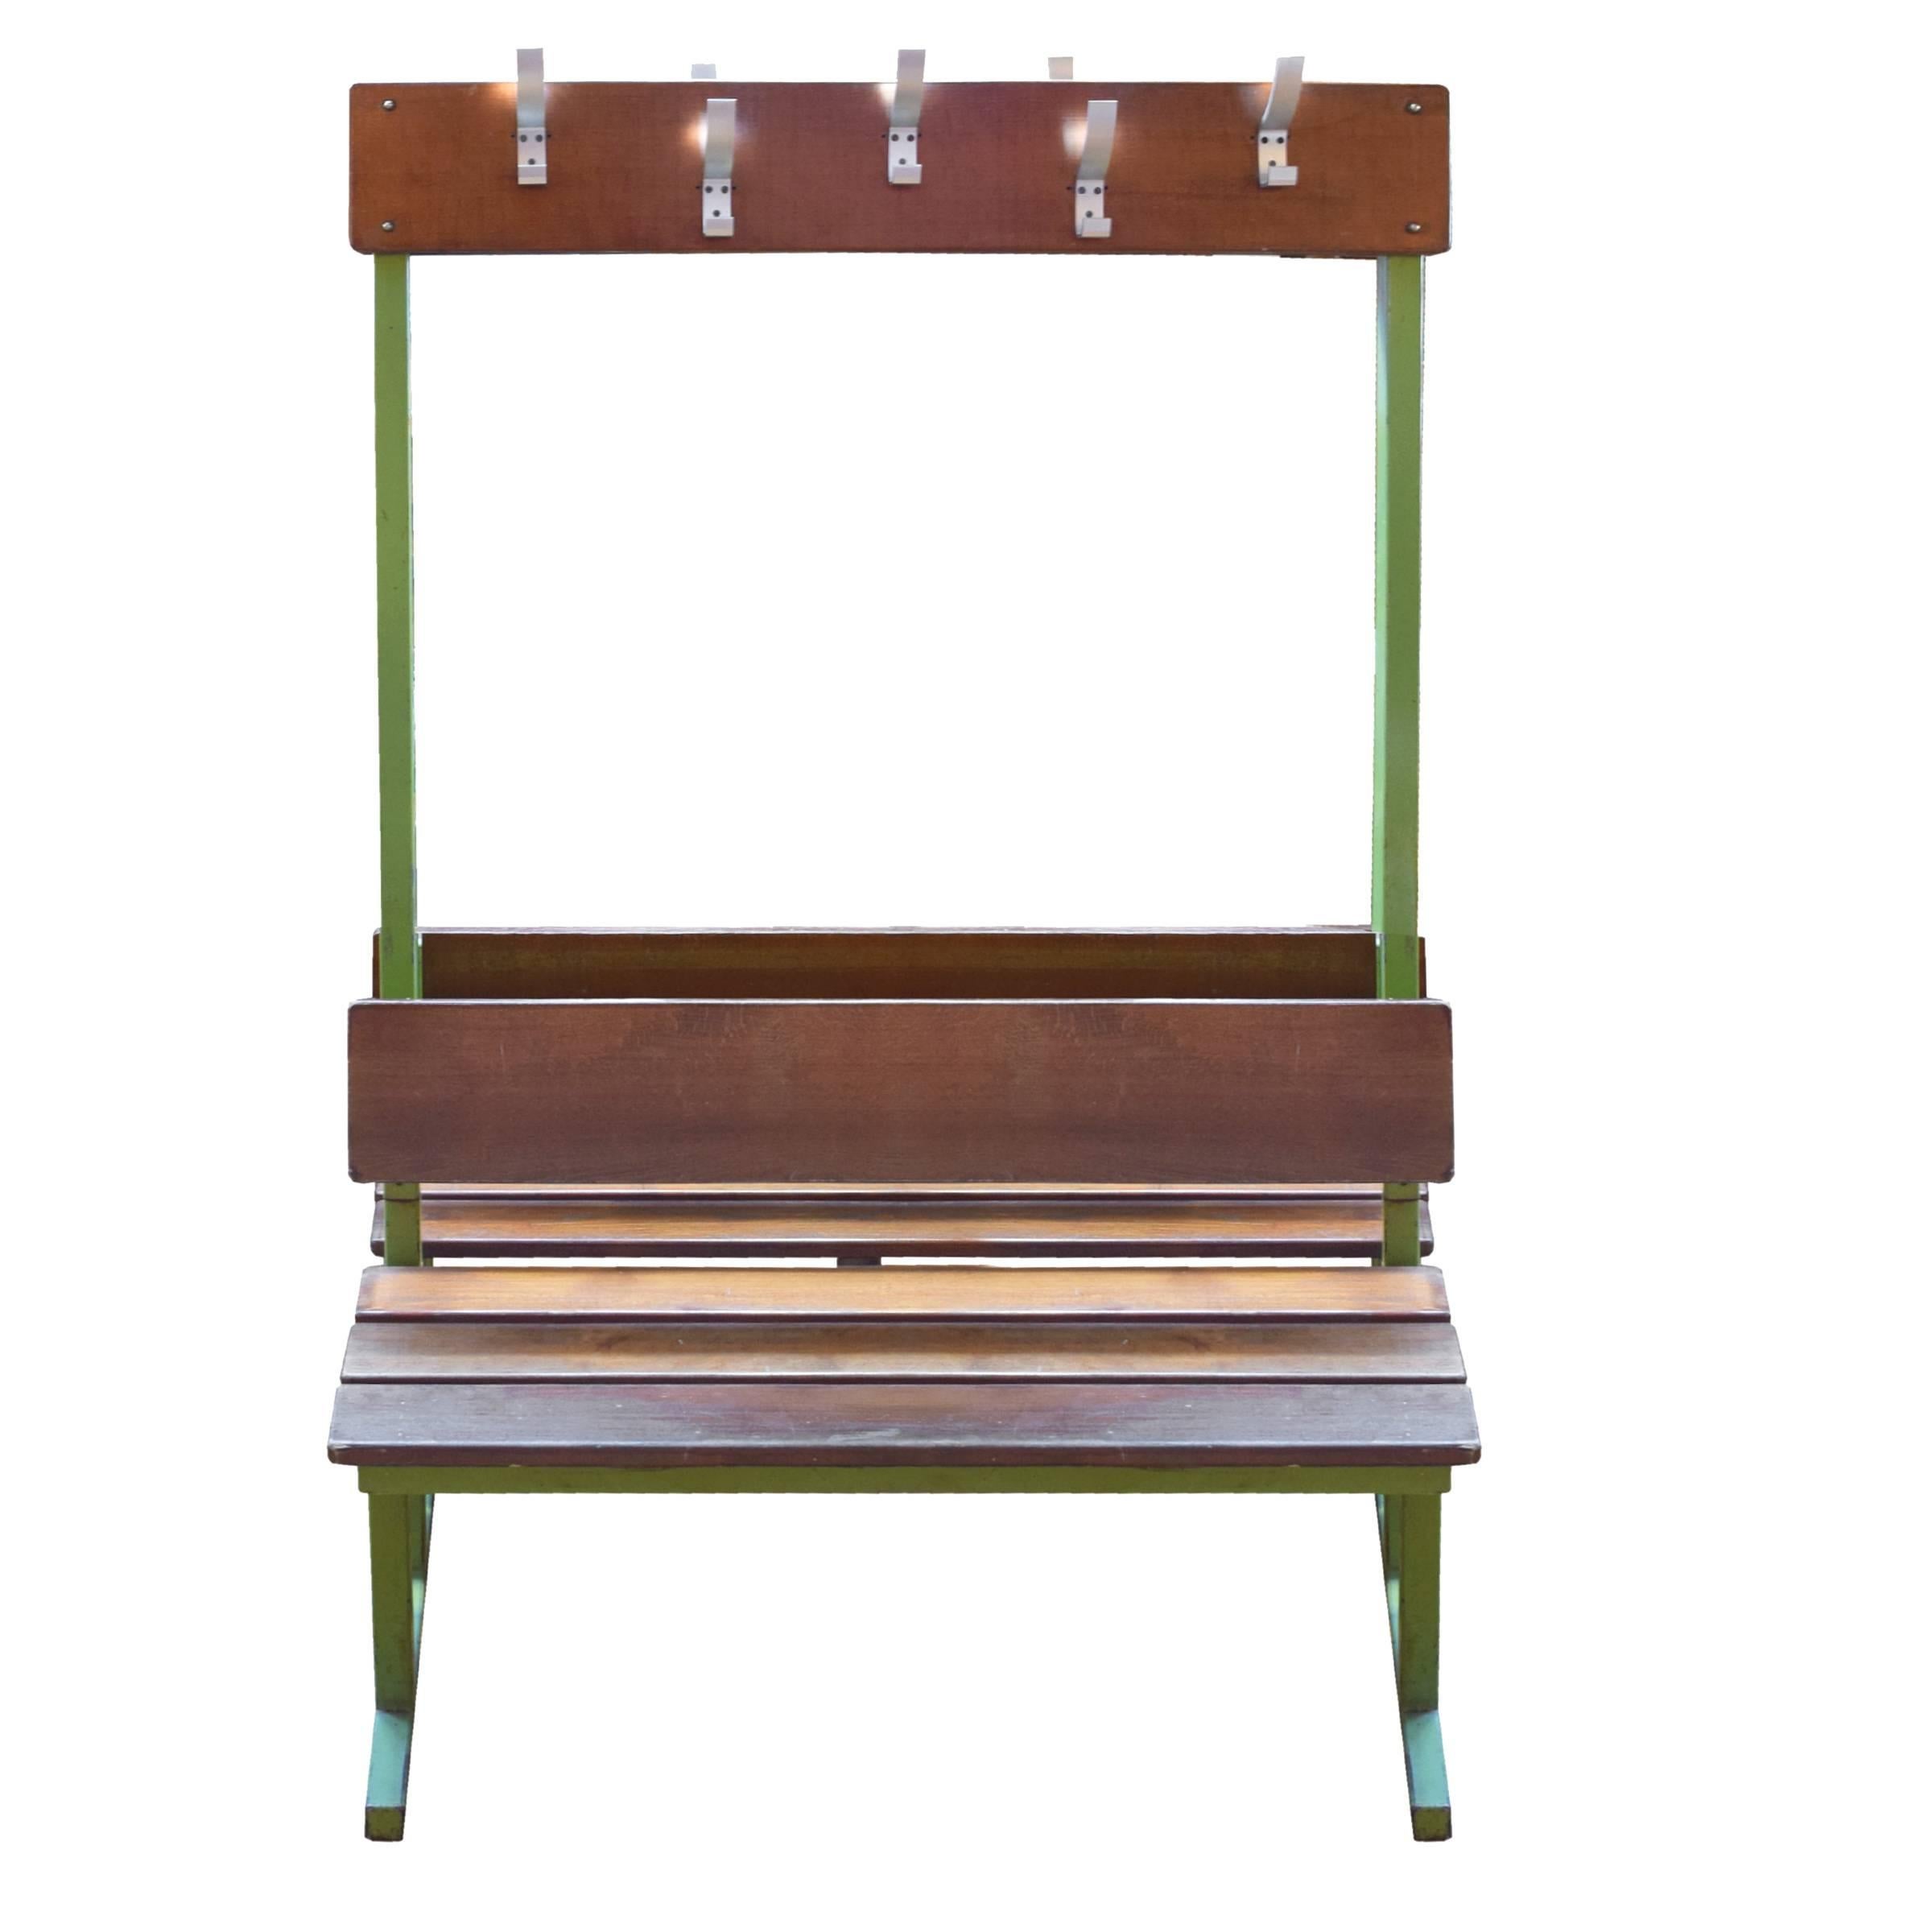 A very cool and useful Mid-Century double-sided French locker room bench with a green metal frame, wood seat and wood coat rack with five metal hooks on each side.
Two available.